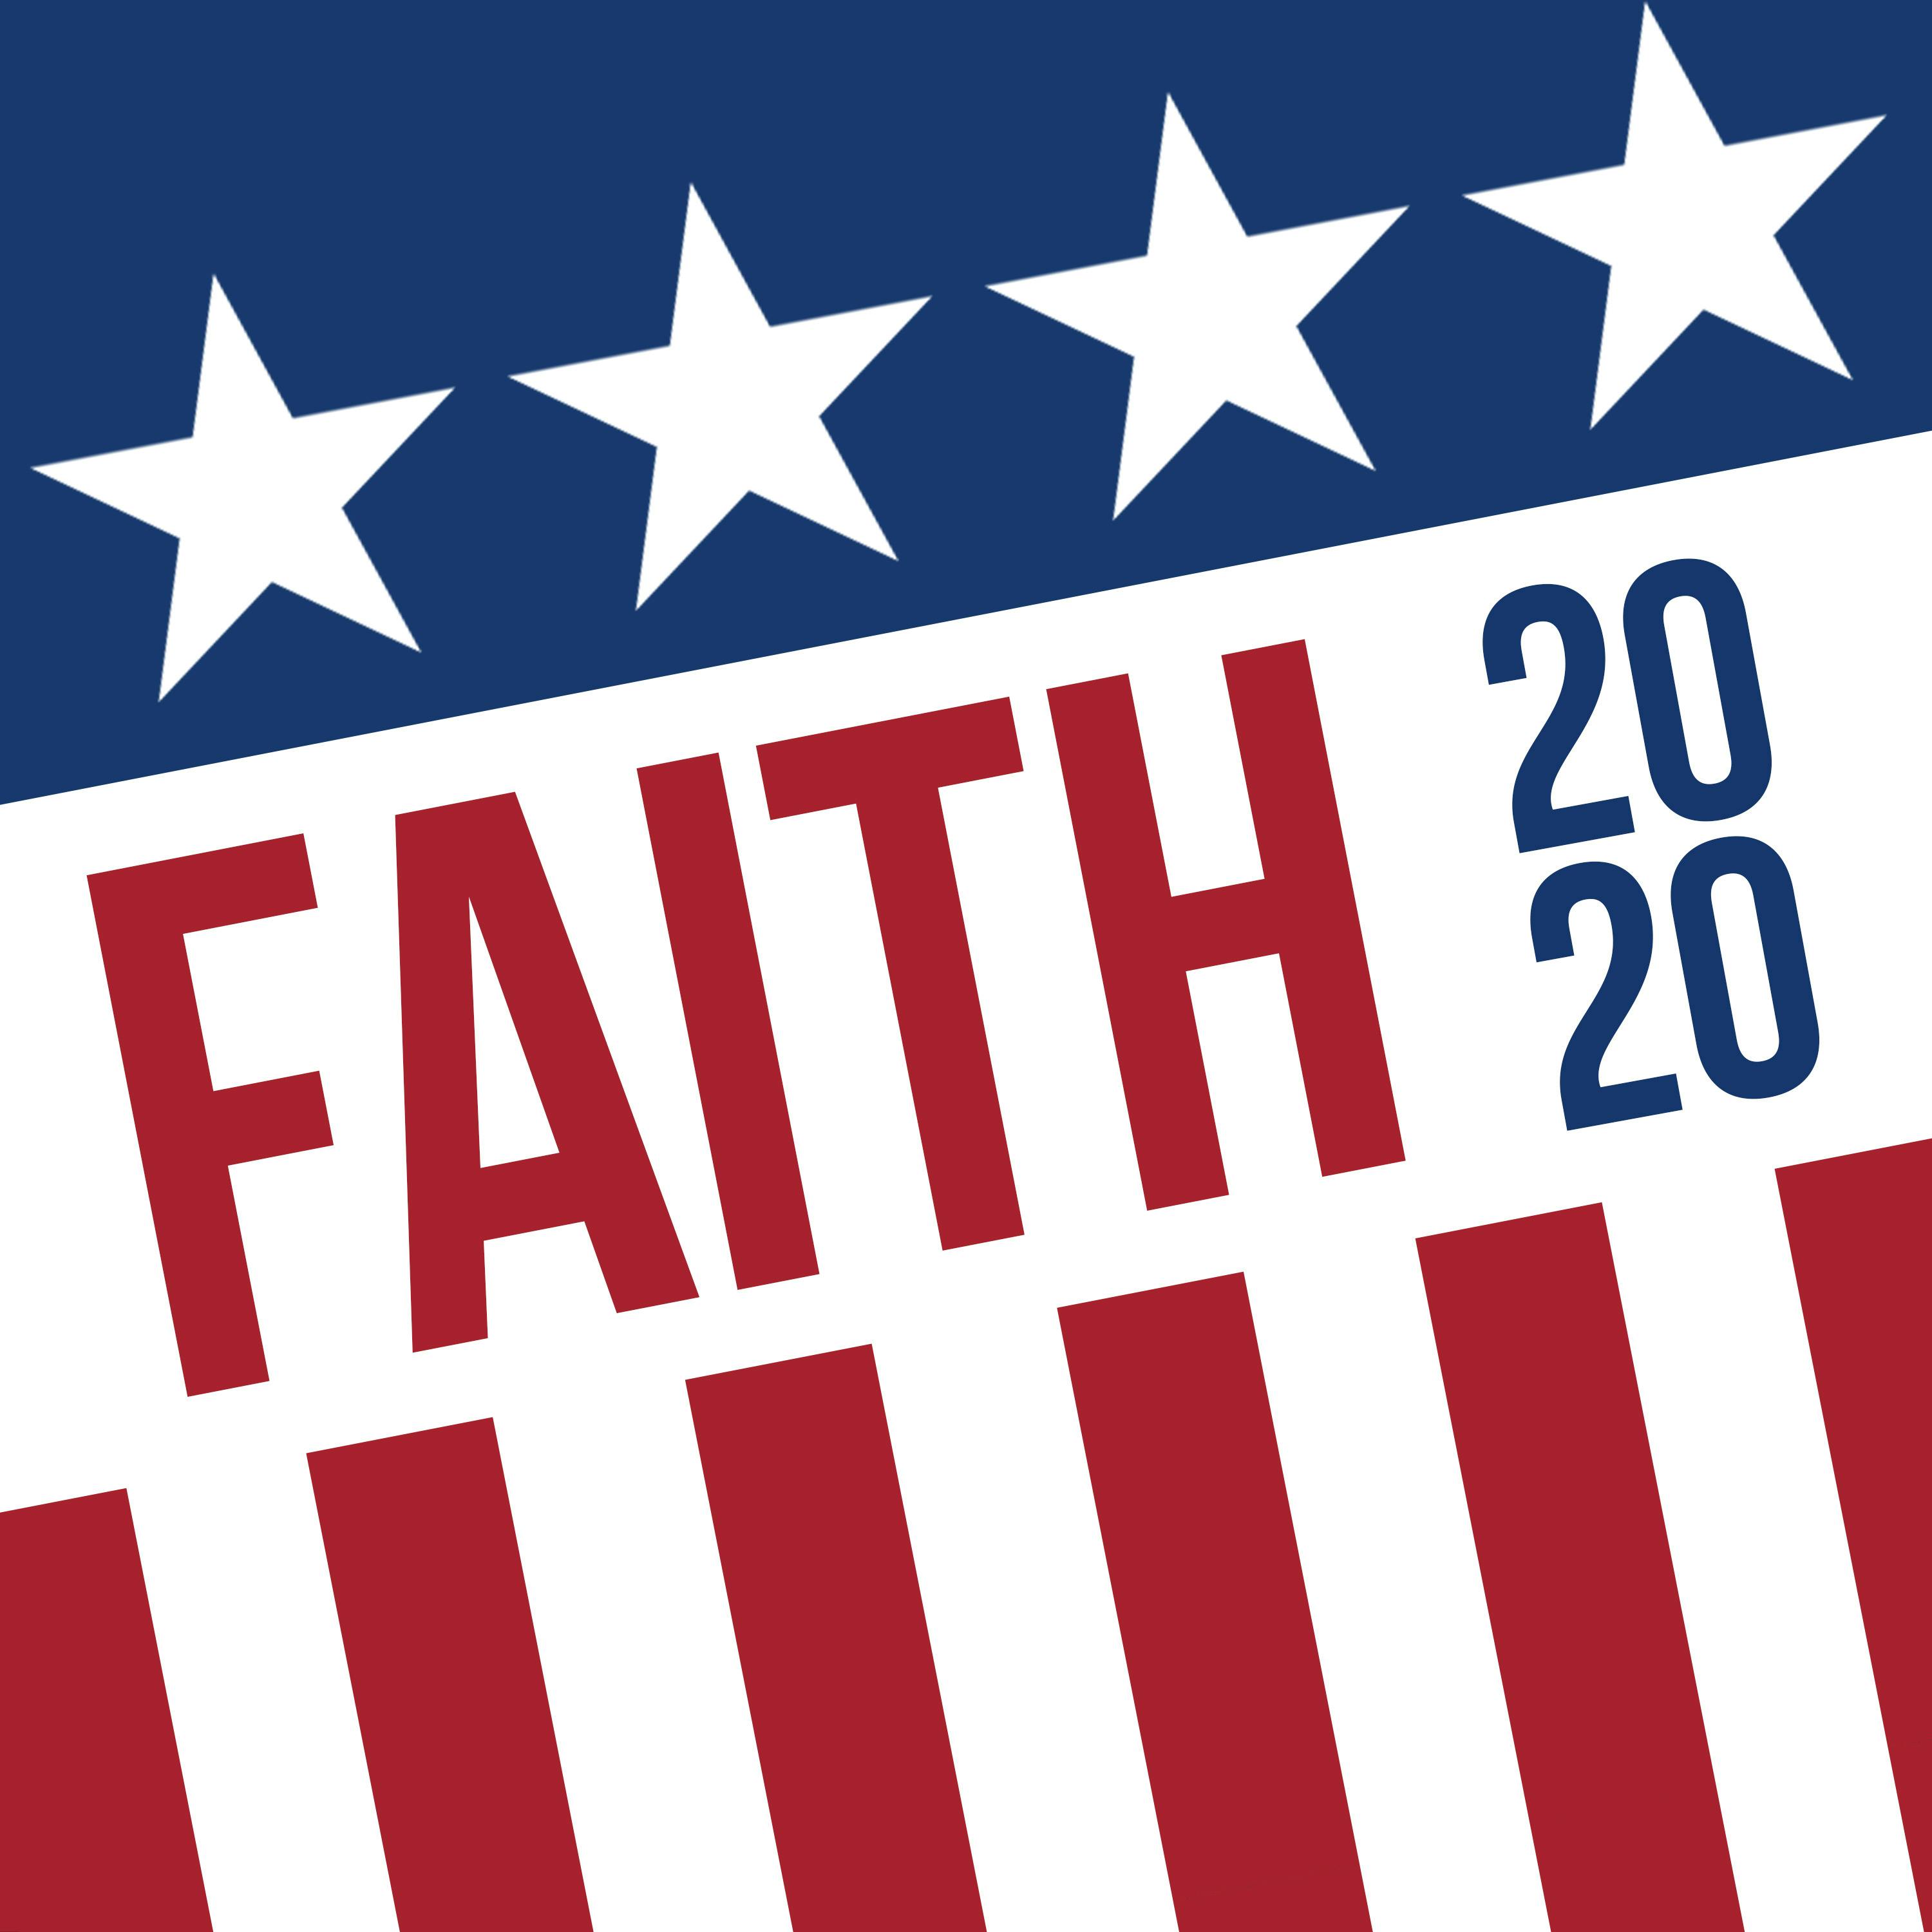 News on Democratic Faith Hires and an Interview with U.S. Senator Chris Coons